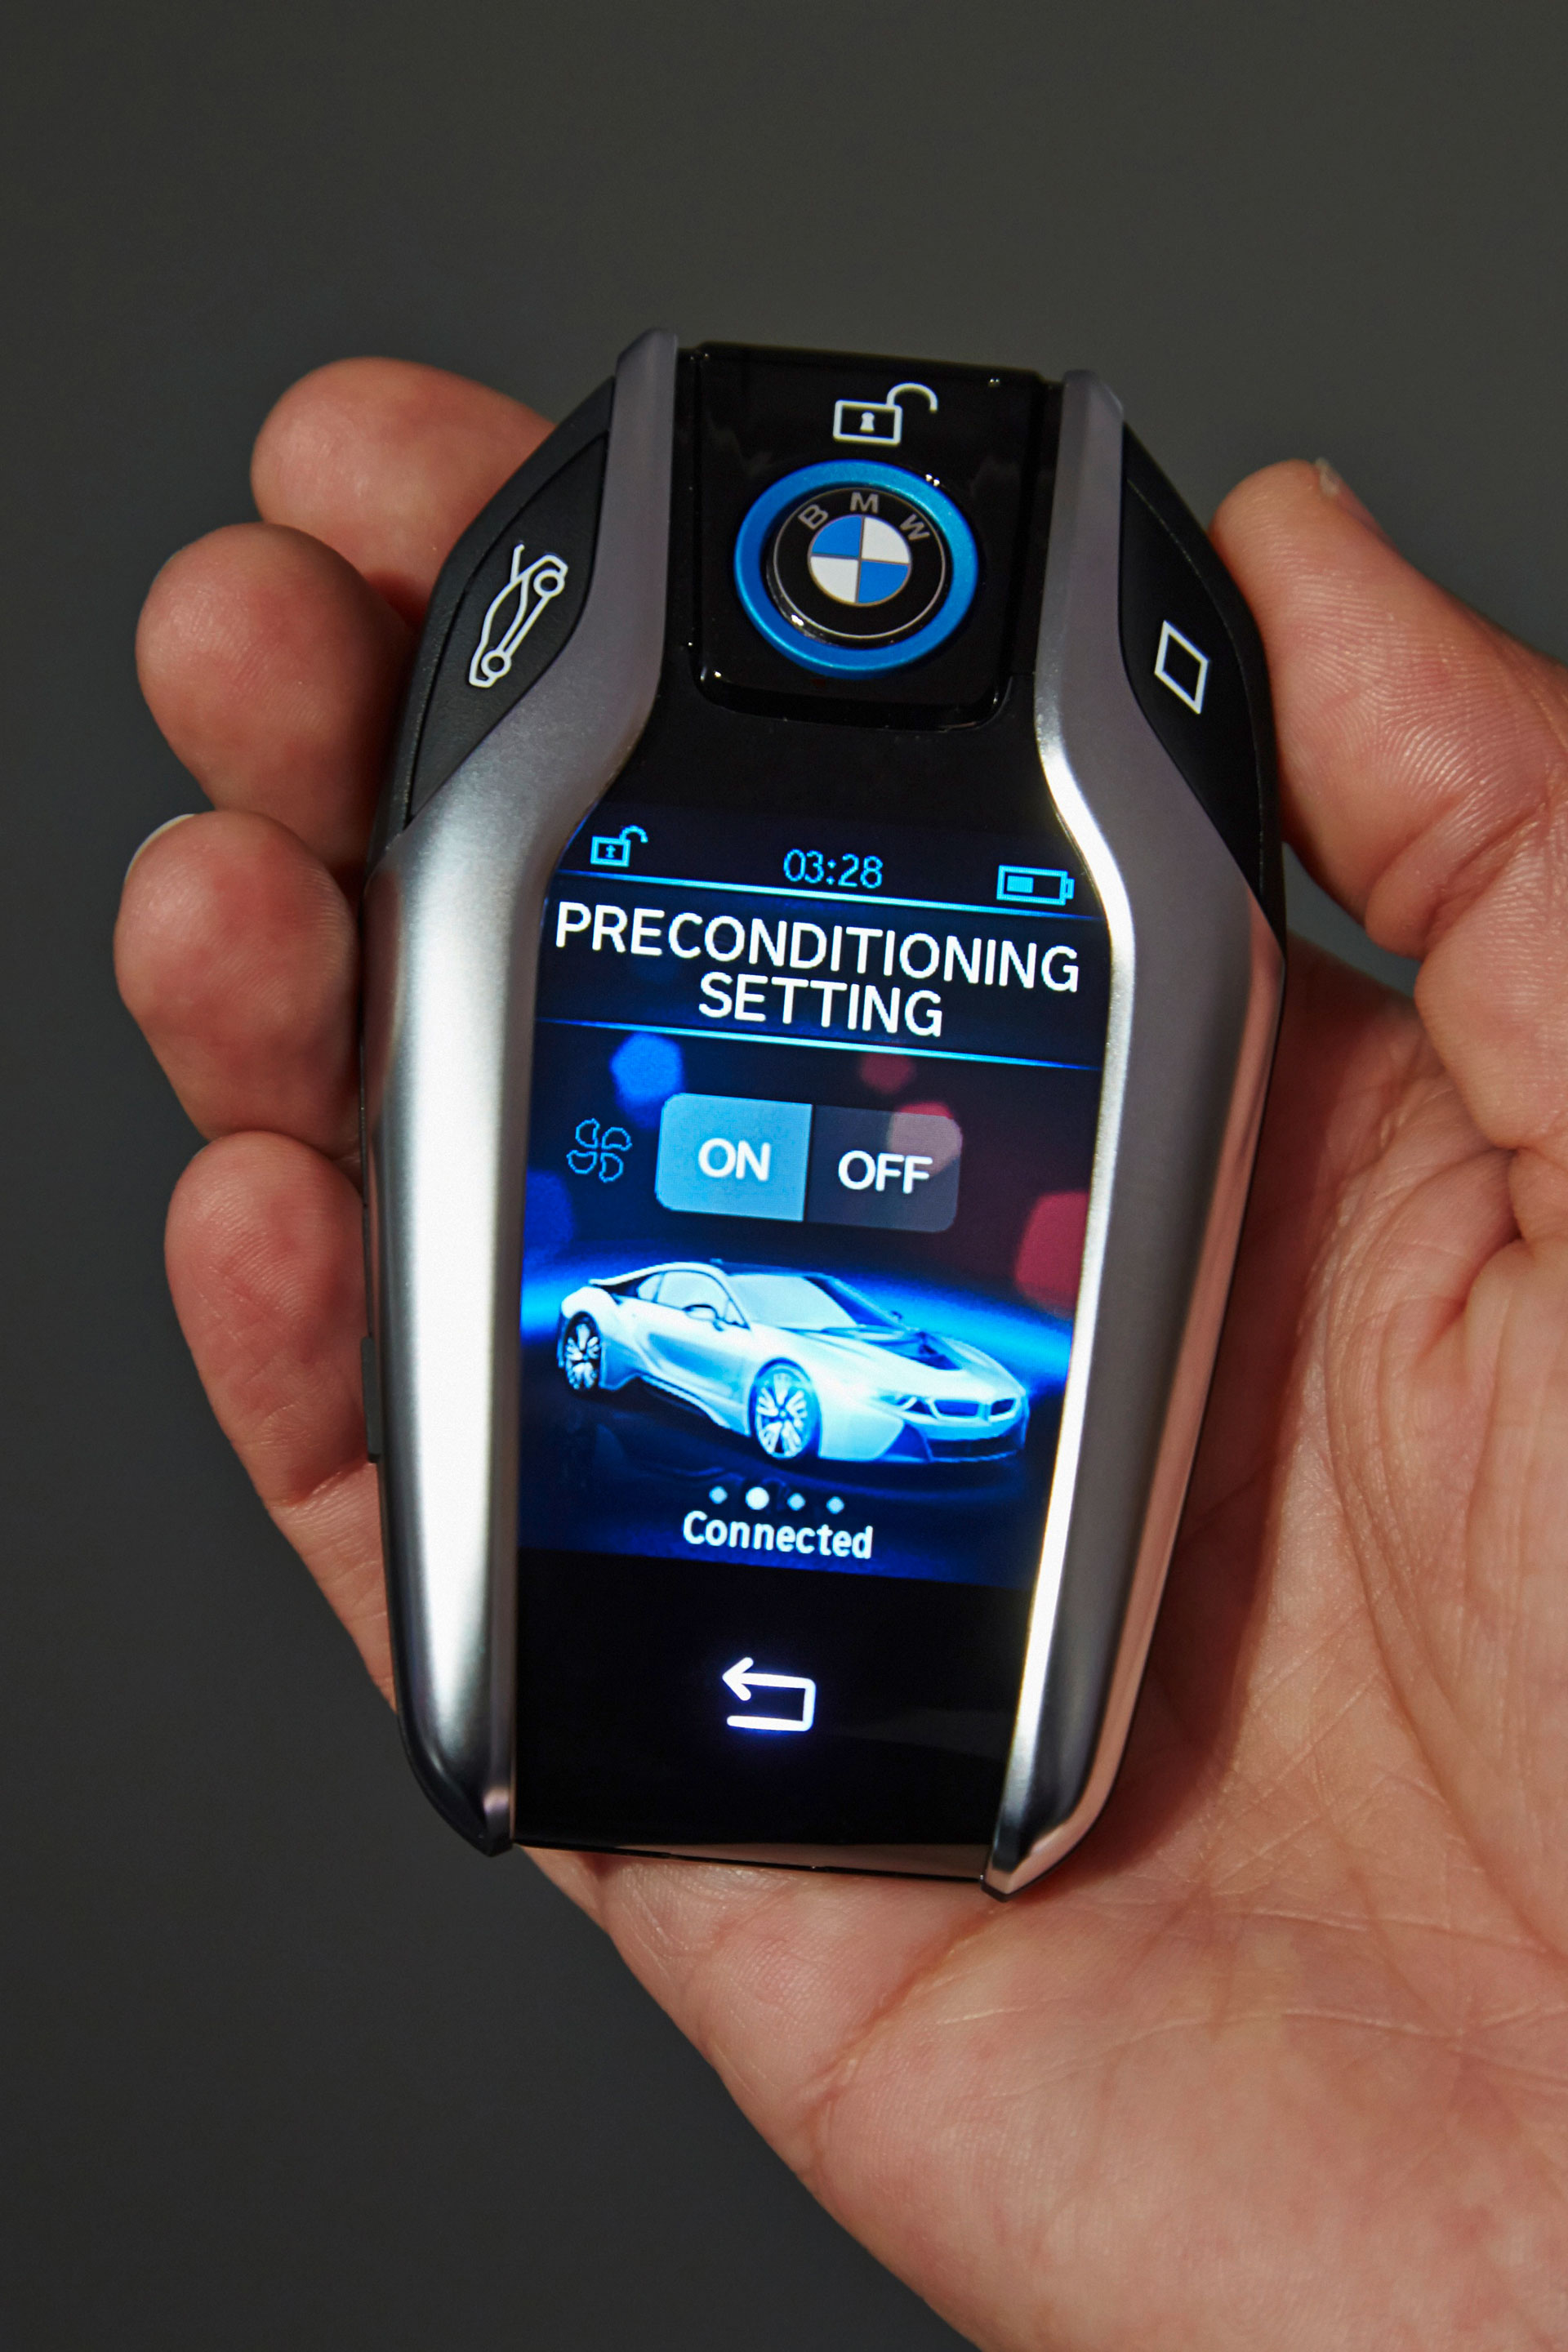 BMW’s New Key Fob With LCD Display